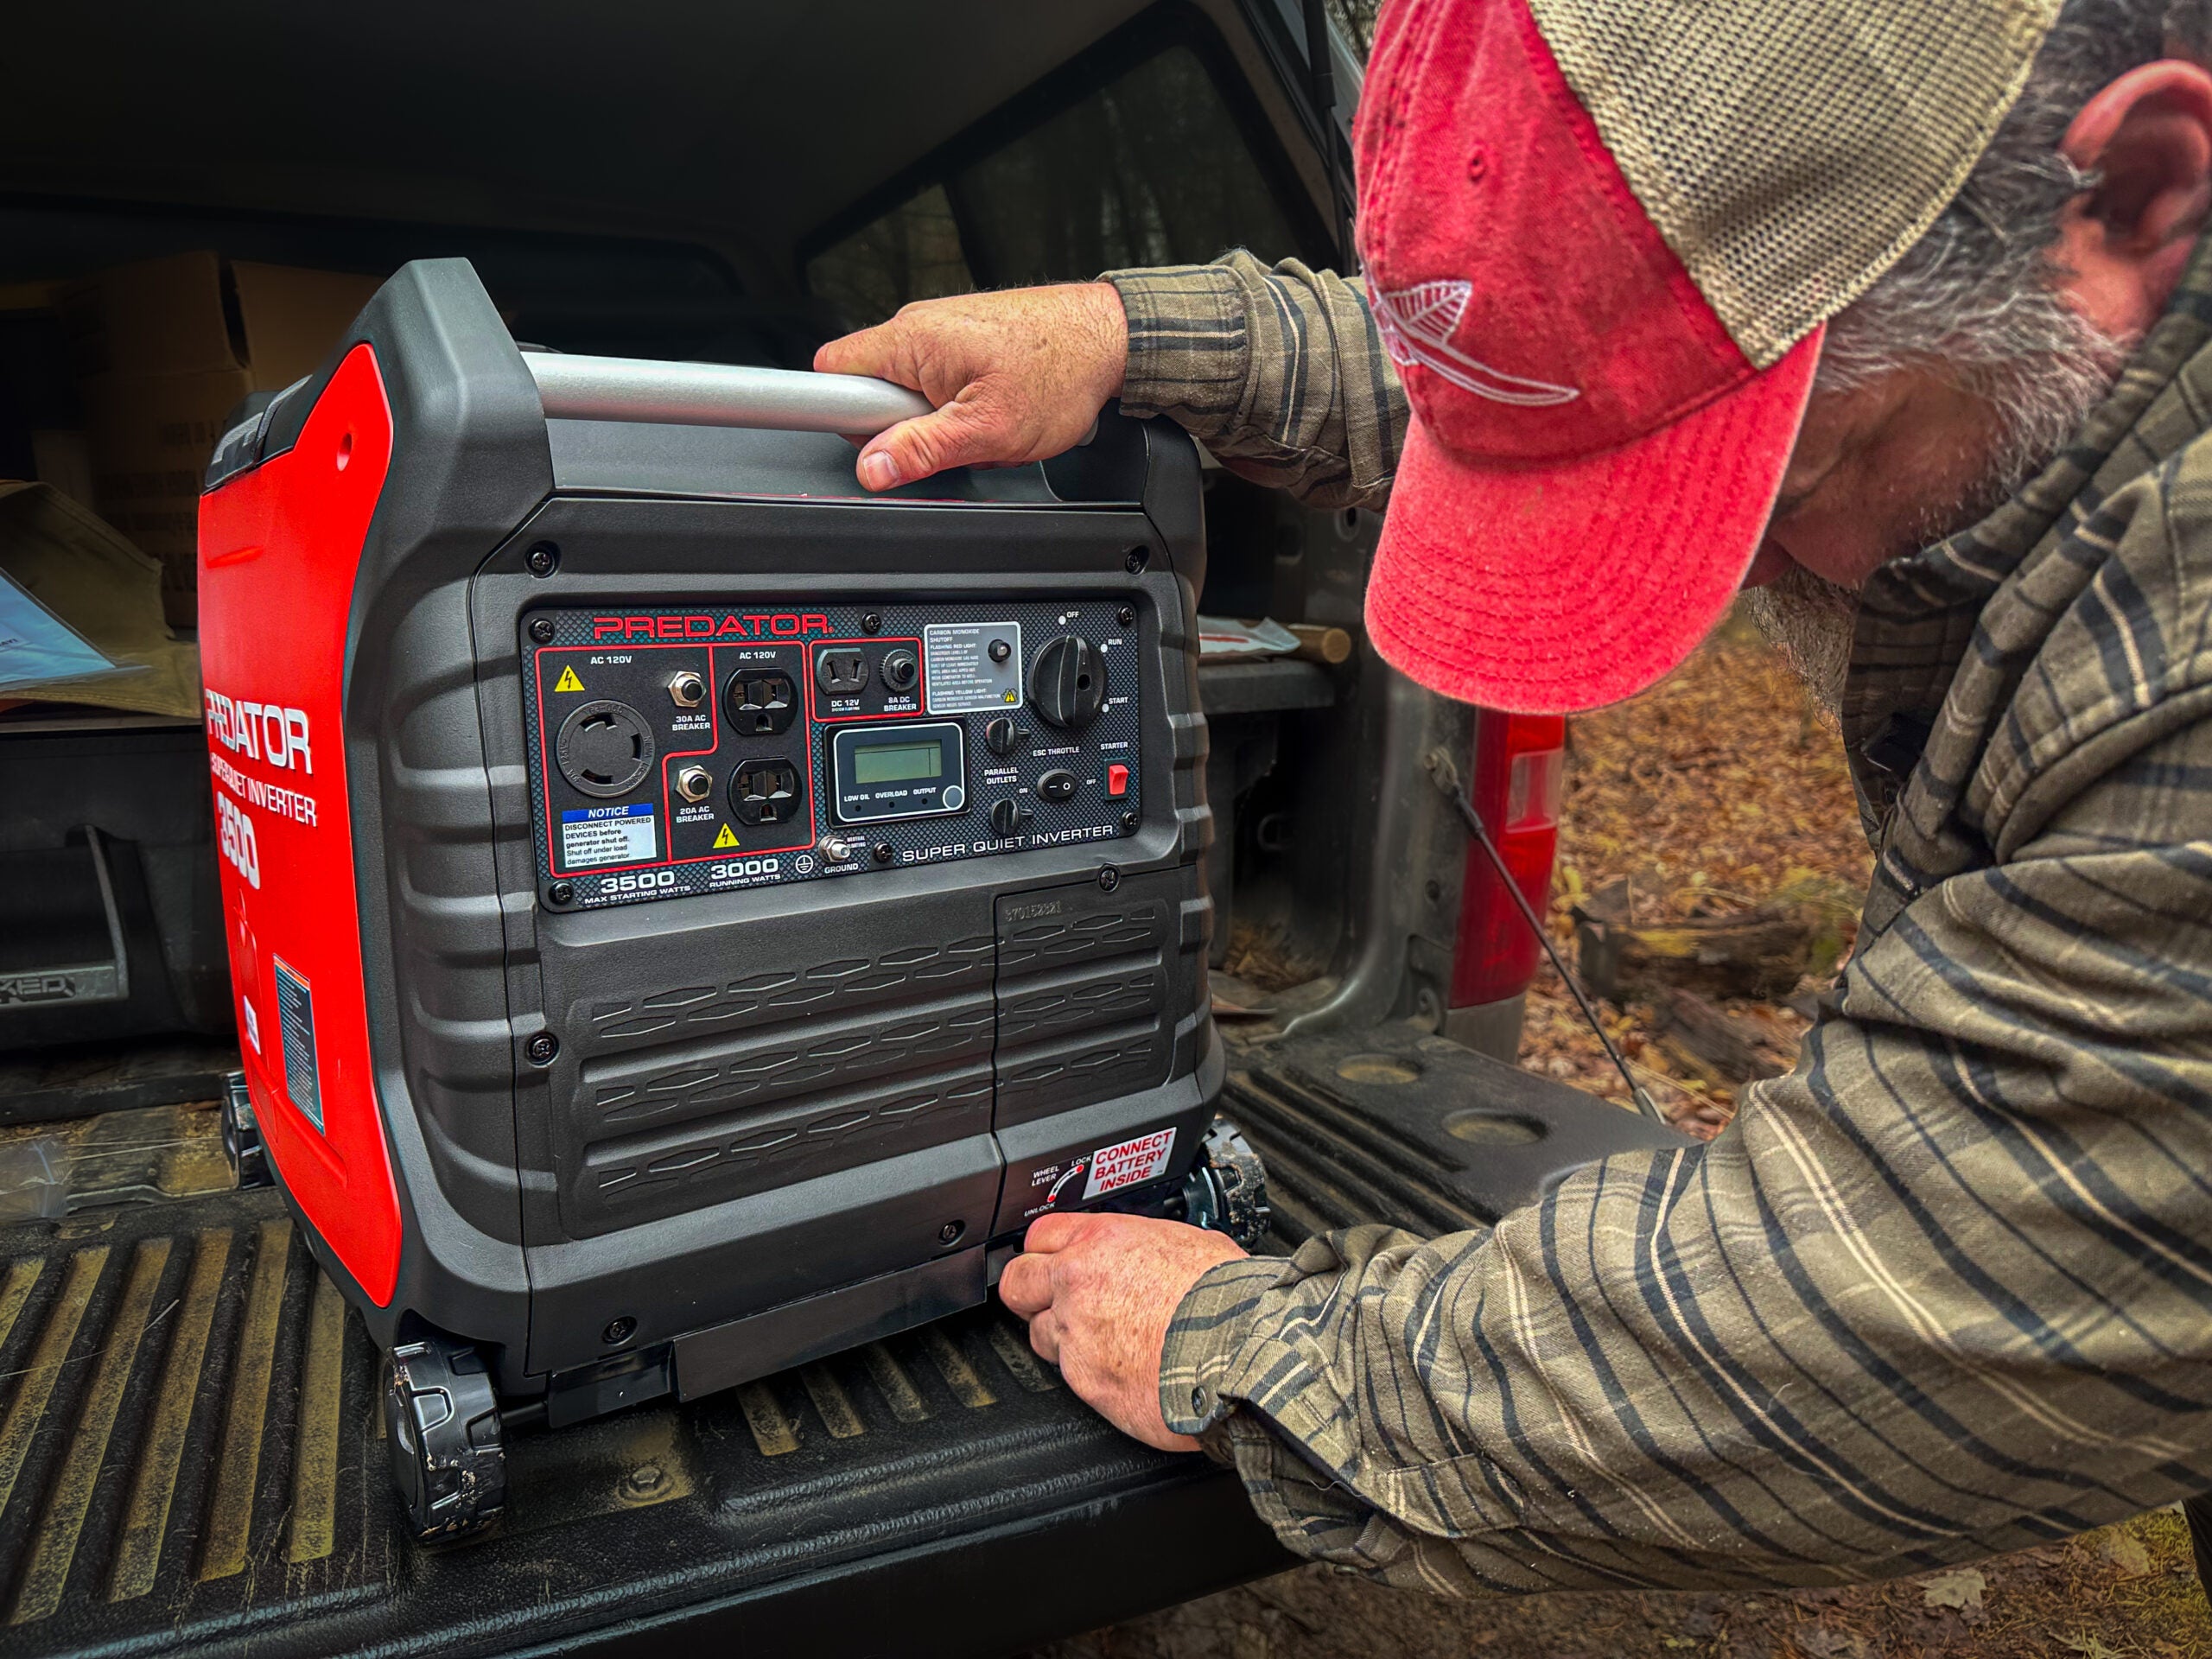 A person in a red and white hat checks an inverter generator on his tailgate.